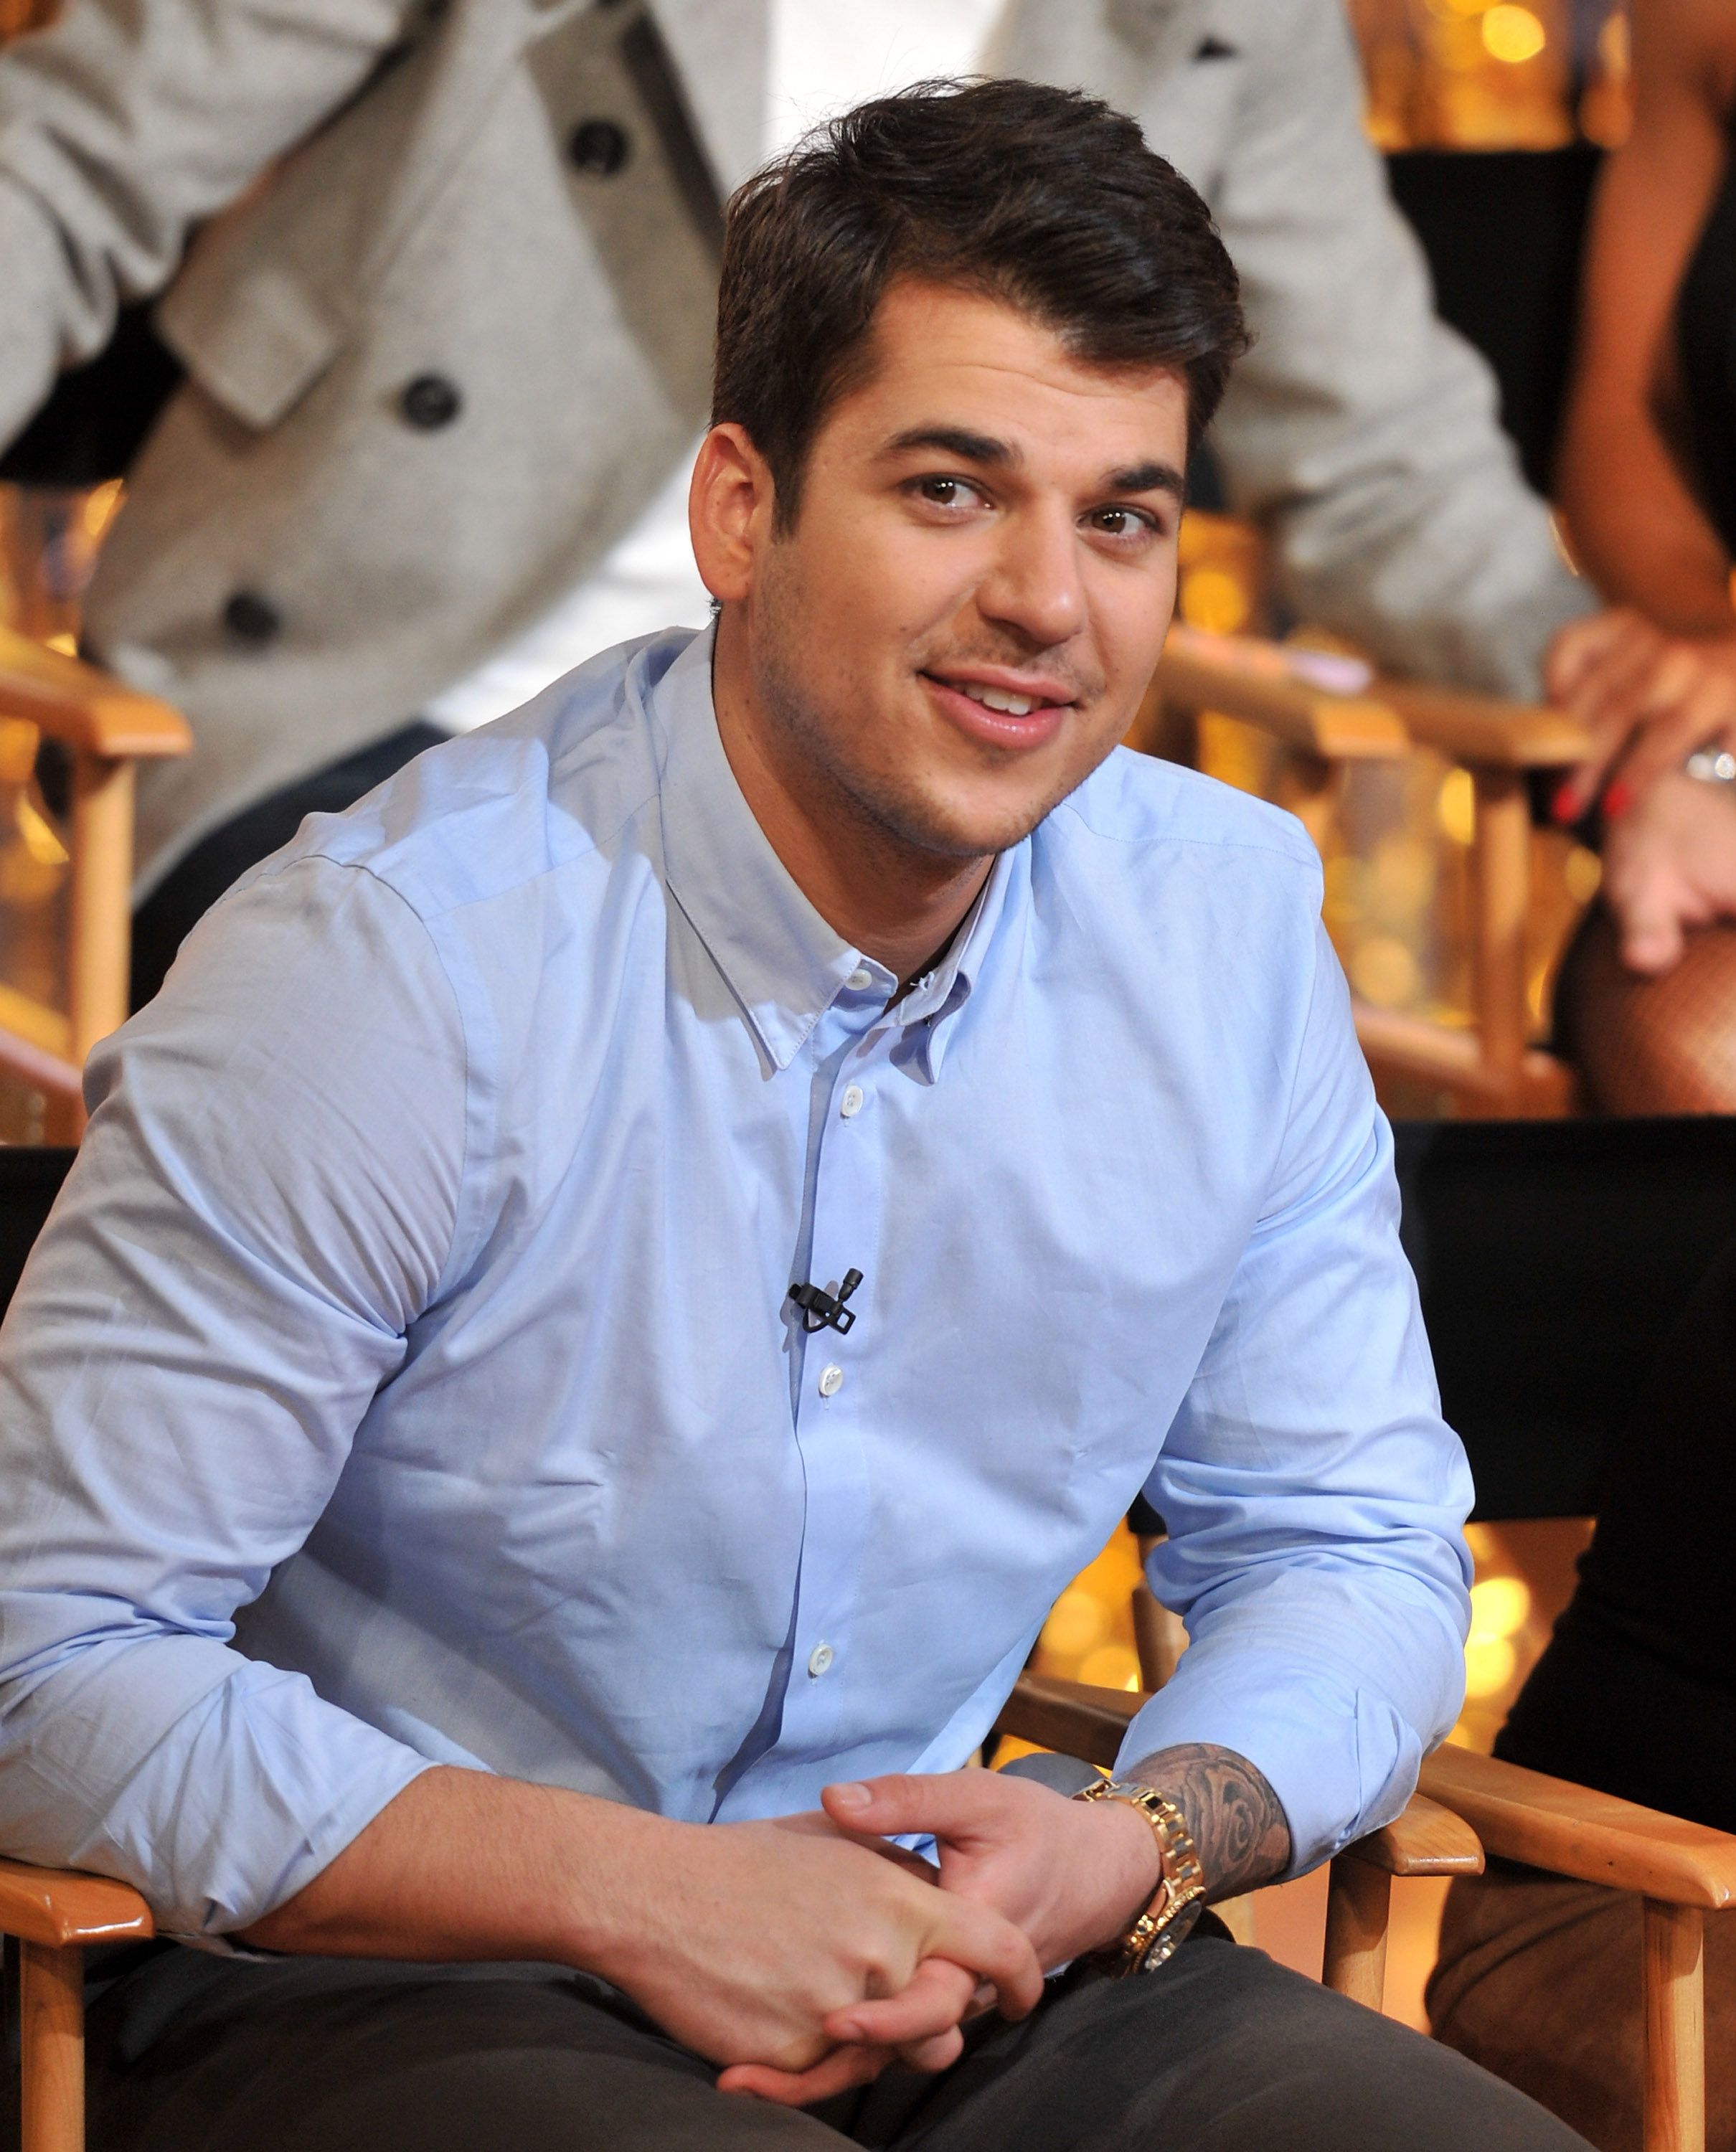 KUWTK star Rob Kardashian during his 2011 visit to "Good Morning America" at ABC Studios in New York City. | Photo: Getty Images